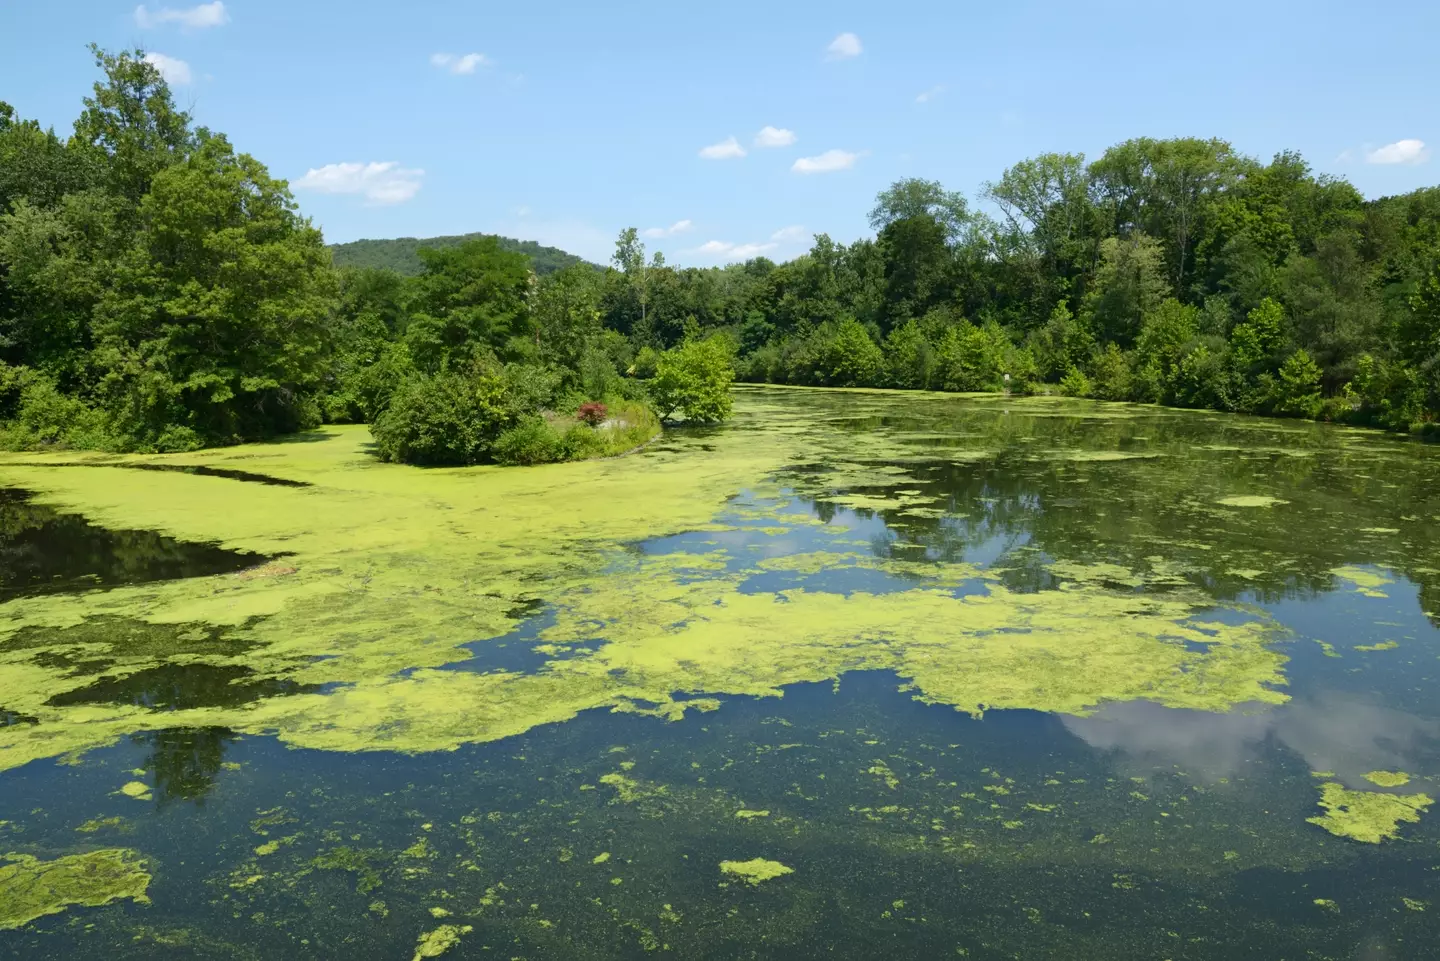 It's important to be super vigilant about toxic blue-green algae.